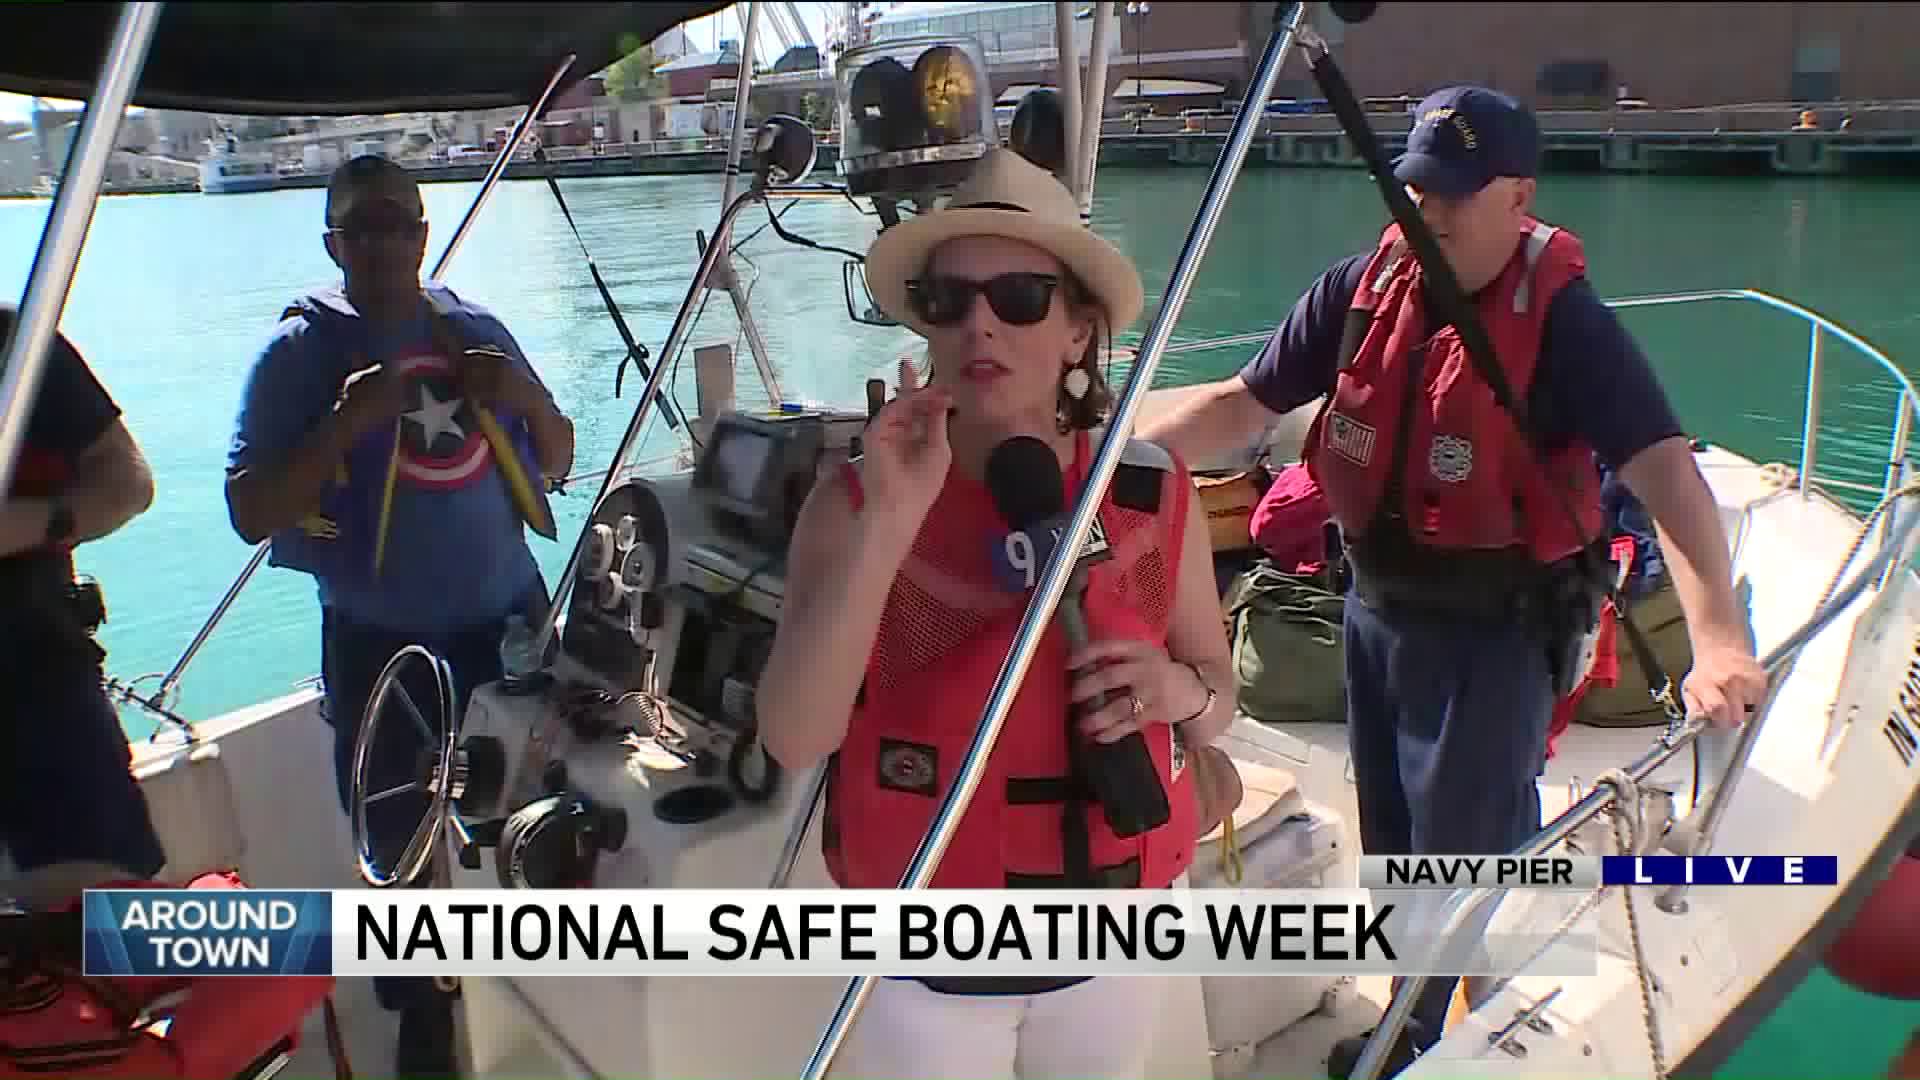 Around Town with the U.S. Coast Guard for National Safe Boating Week